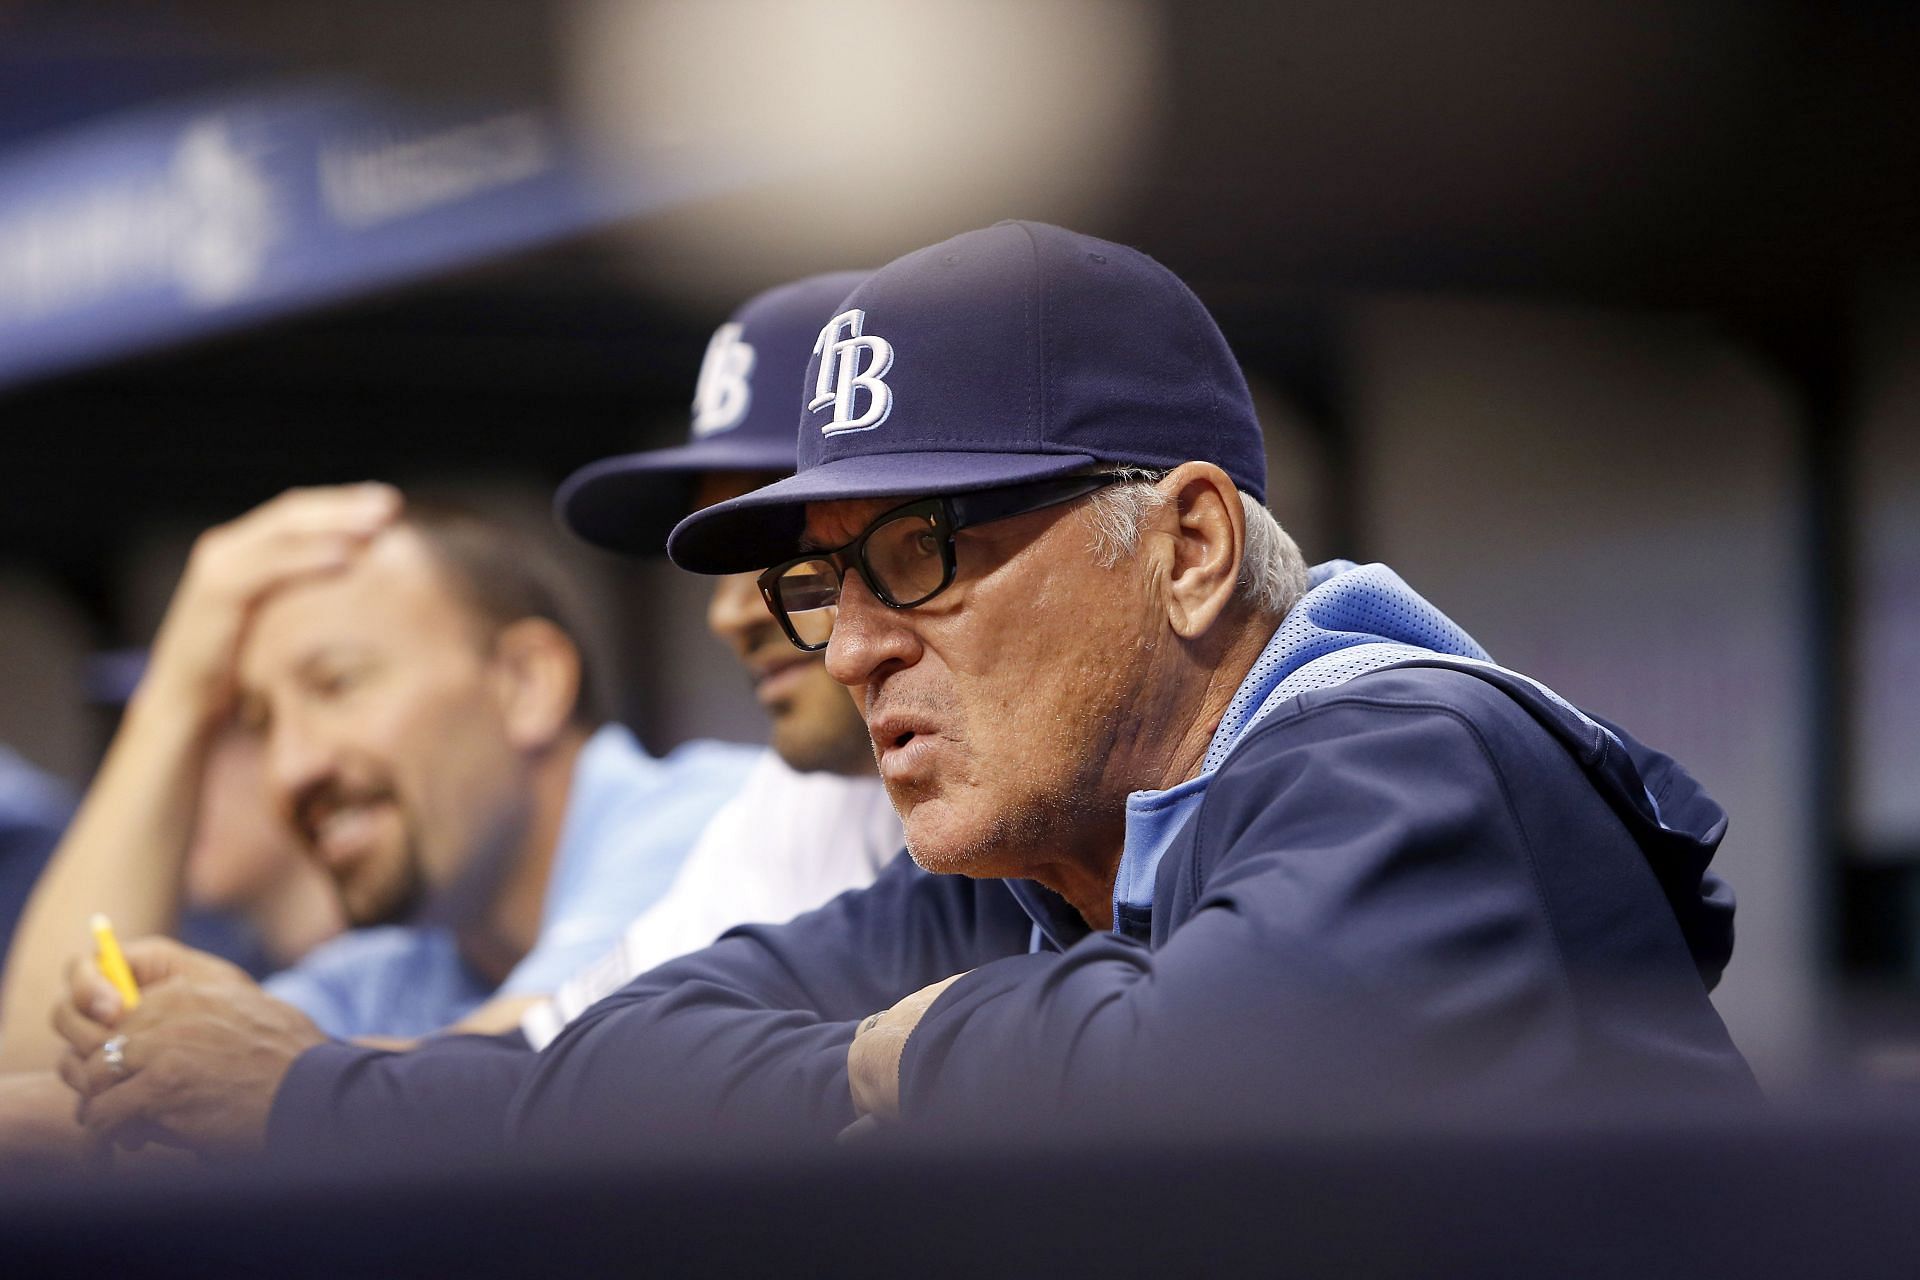 Manager Joe Maddon of the Tampa Bay Rays looks on from the dugout.